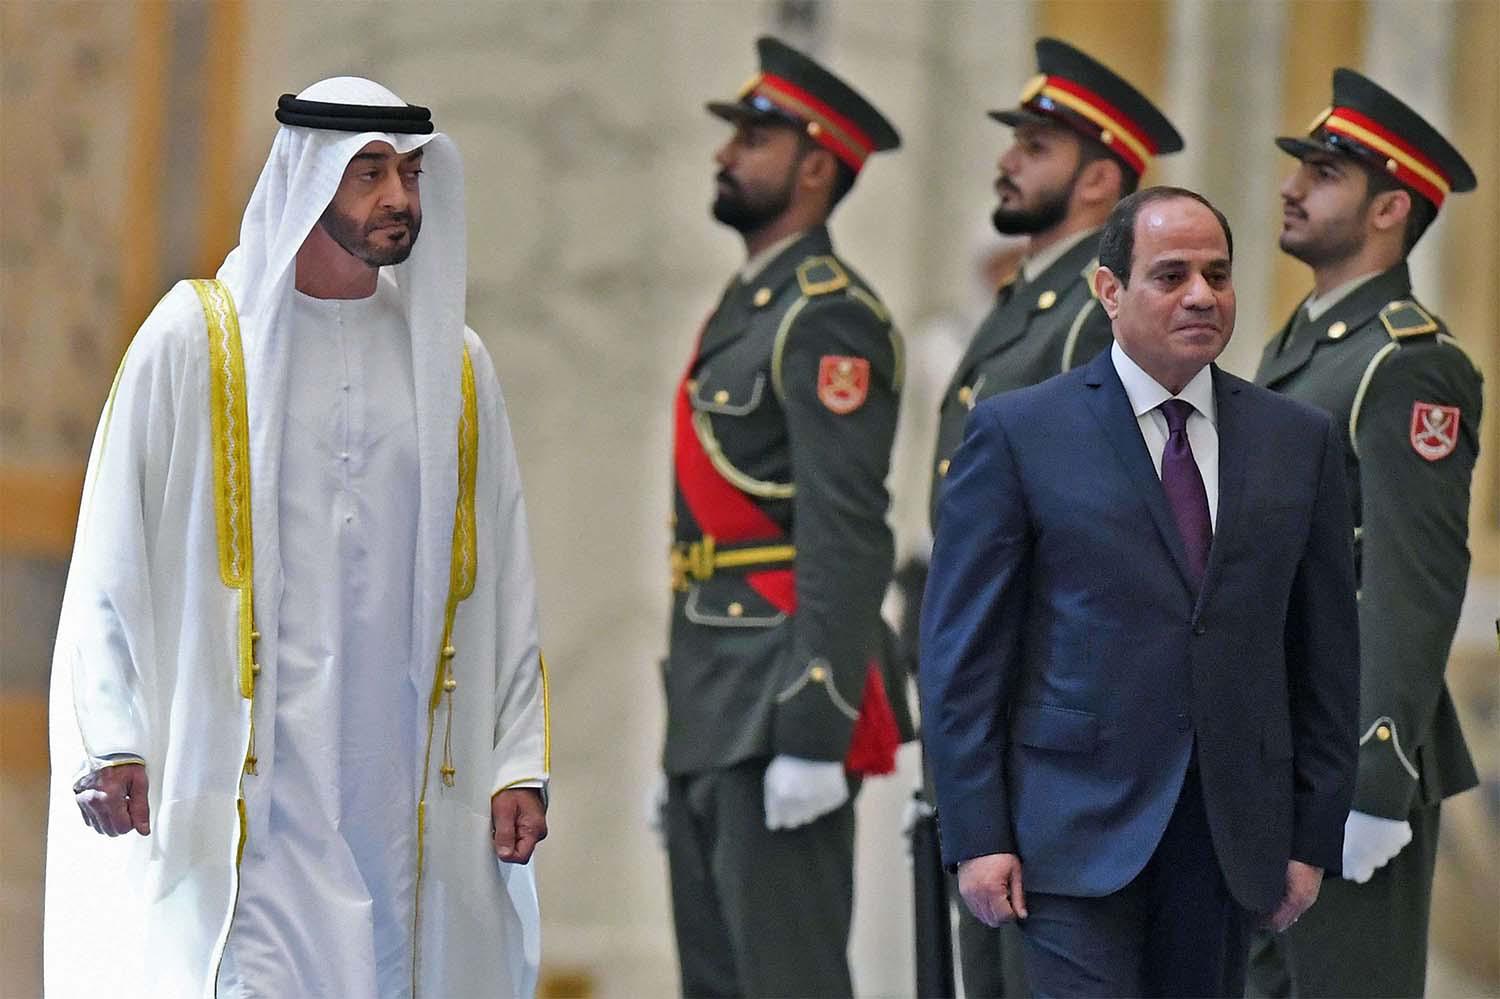 Egyptian President Abdel Fattah al-Sisi and the Crown Prince of Abu Dhabi, Sheikh Mohamed bin Zayed al-Nahyan, attend a welcome ceremony in Al-Watan presidential palace in Abu Dhabi